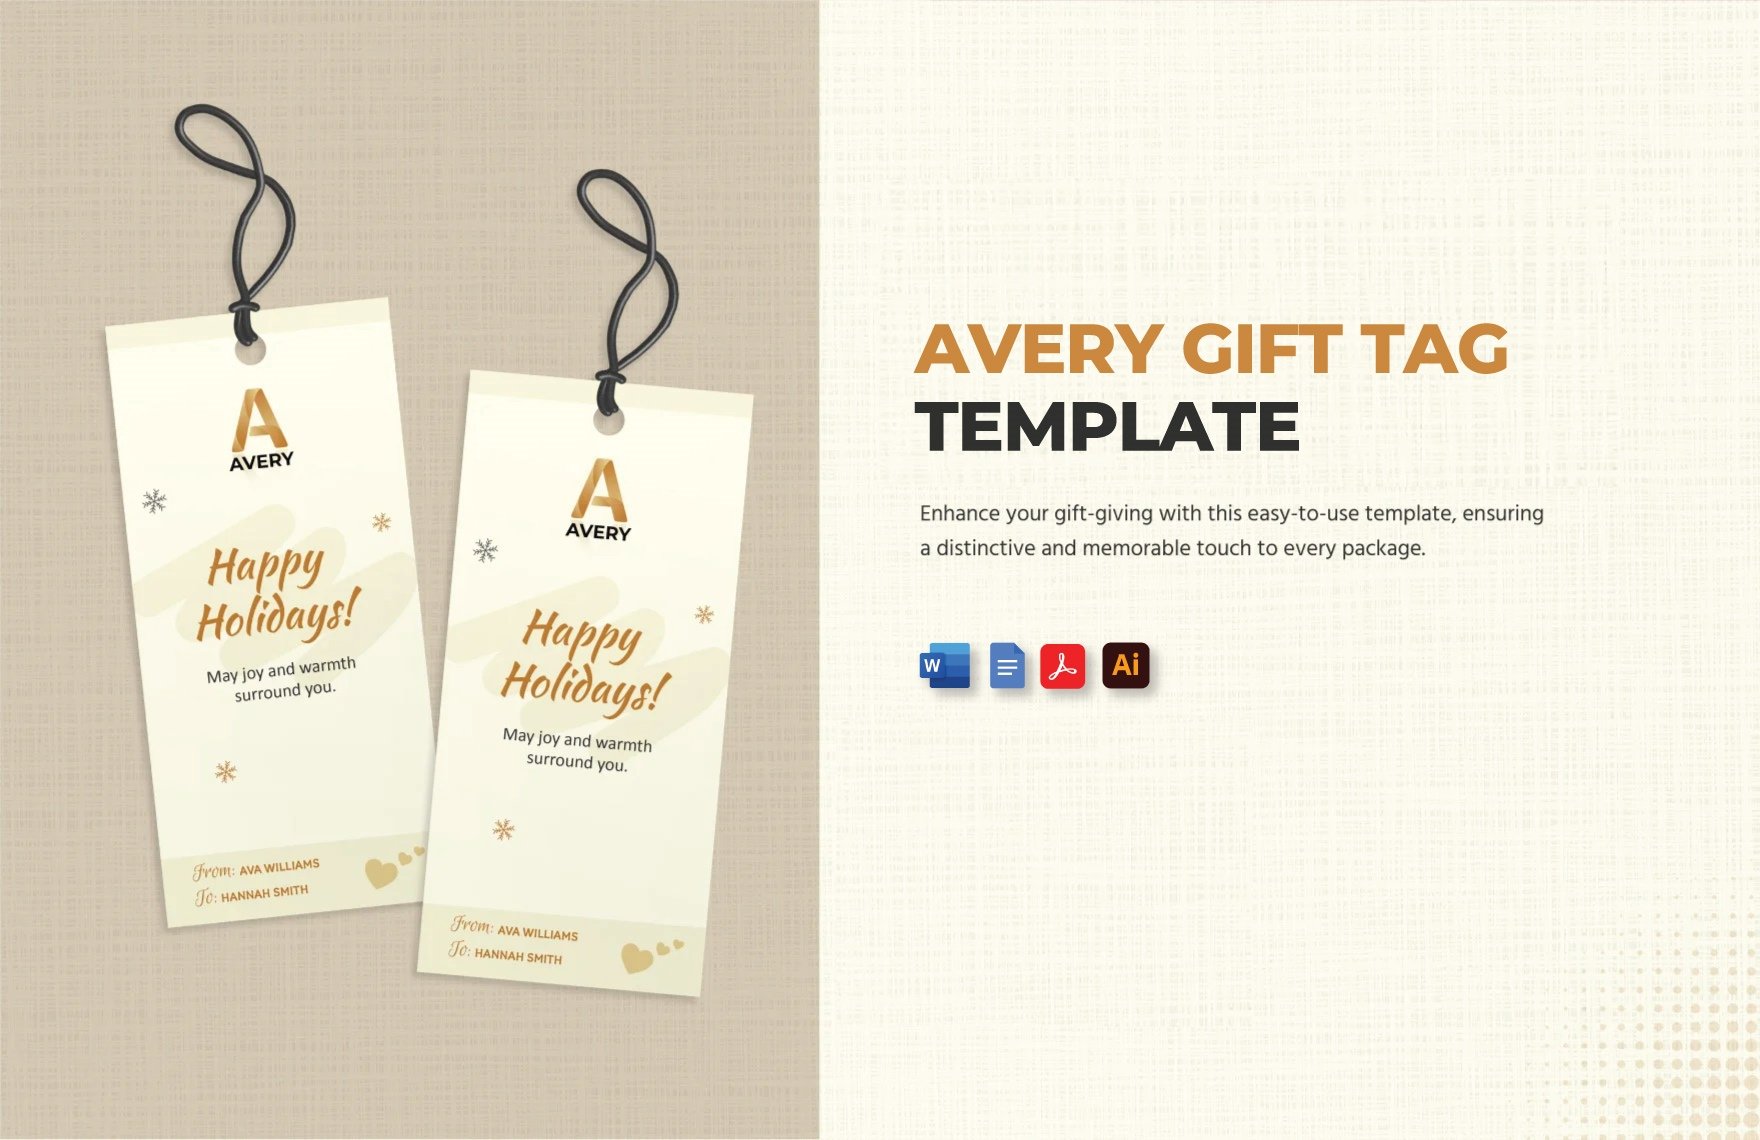 Avery Gift Tag Template